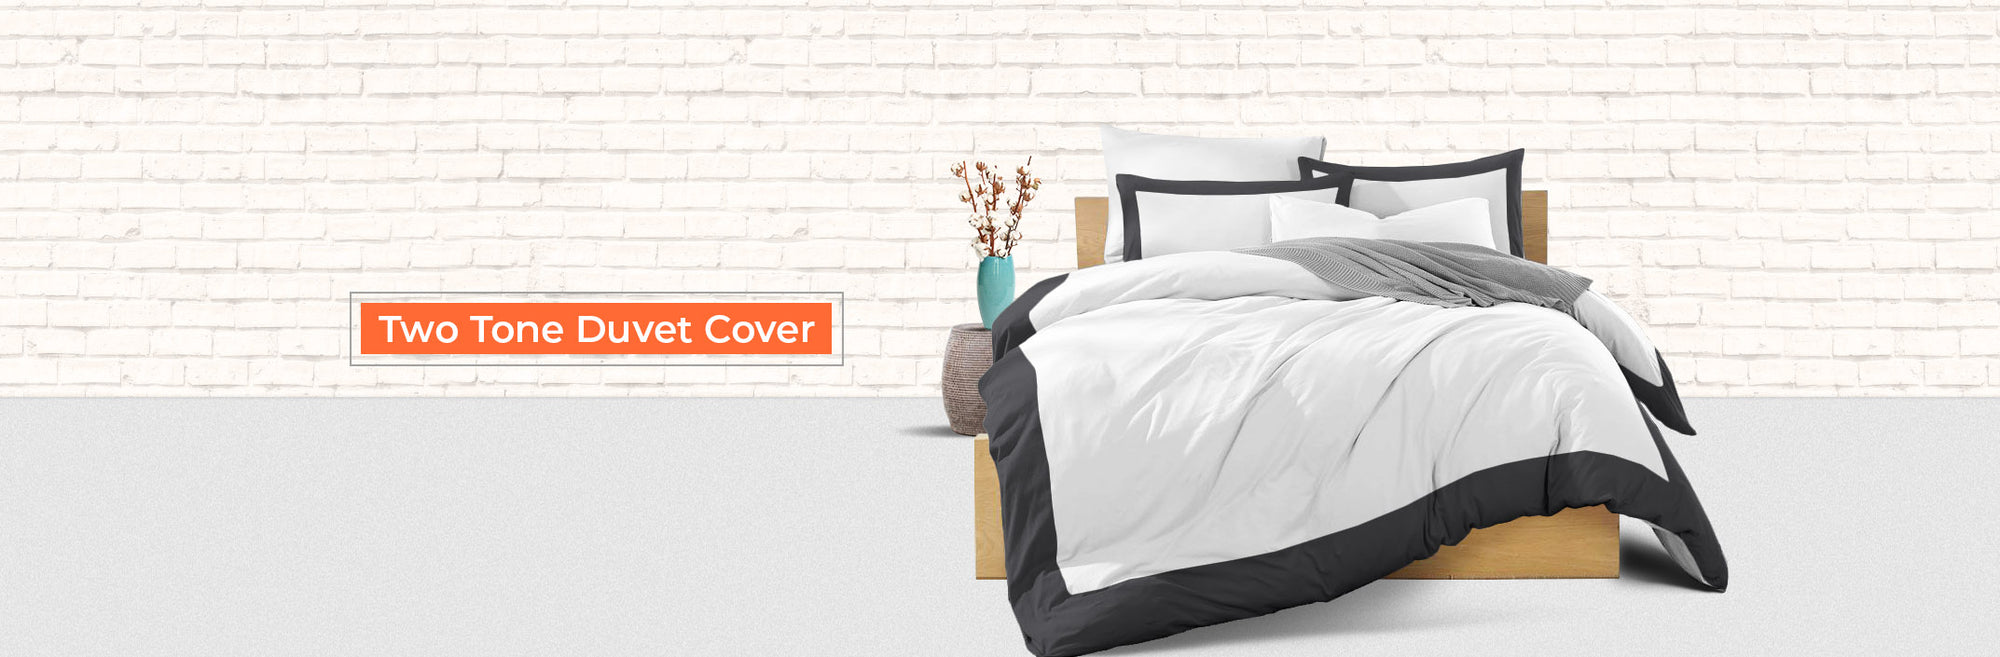 Two Tone Duvet Cover